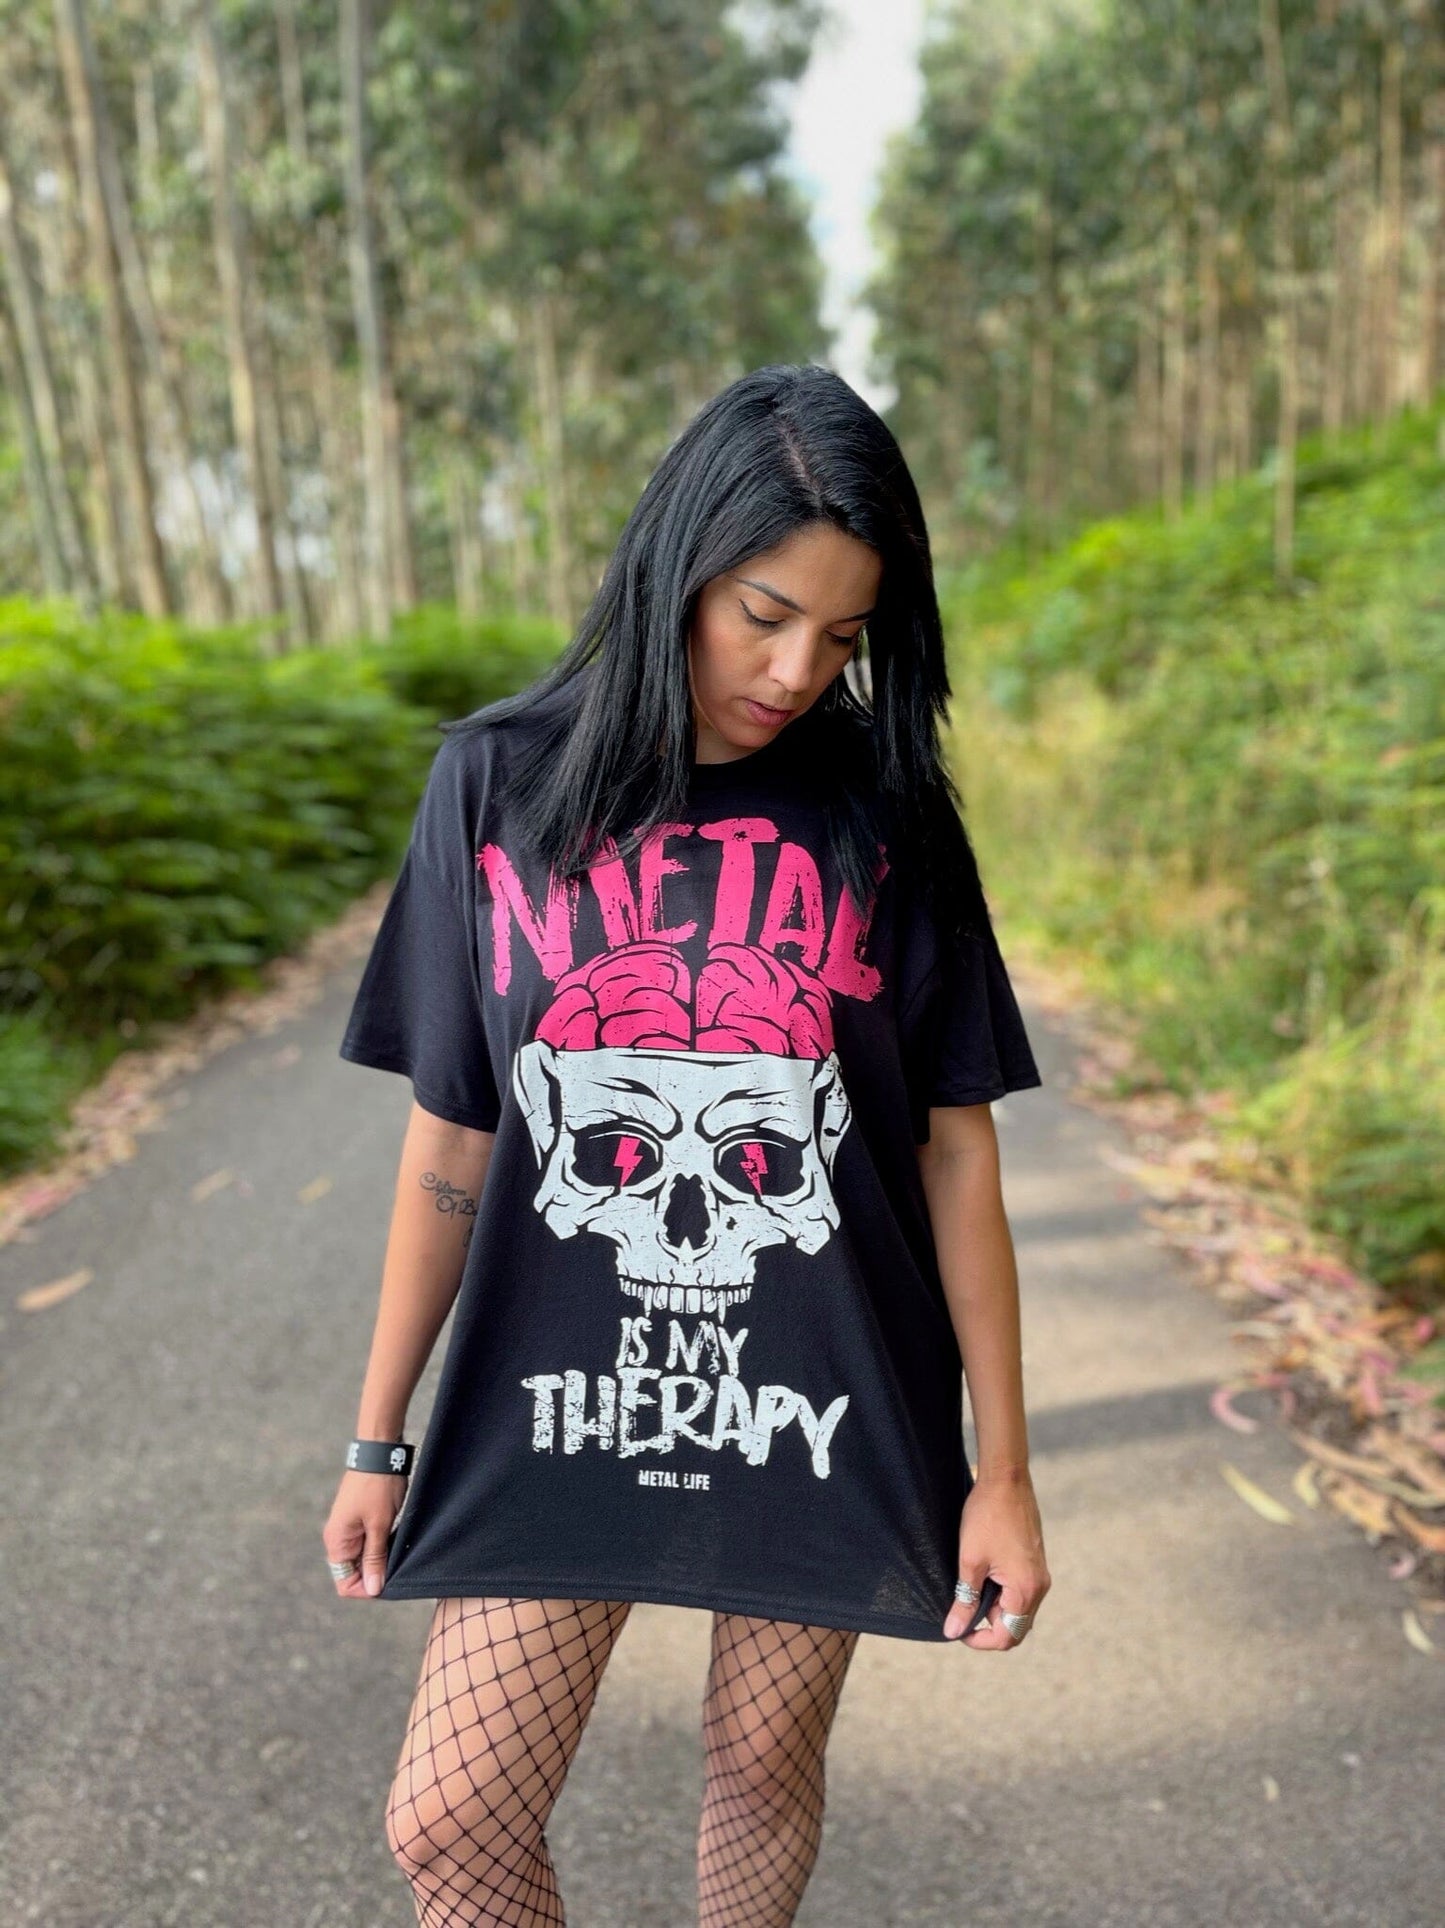 Camiseta Metal is my therapy - Metal Life